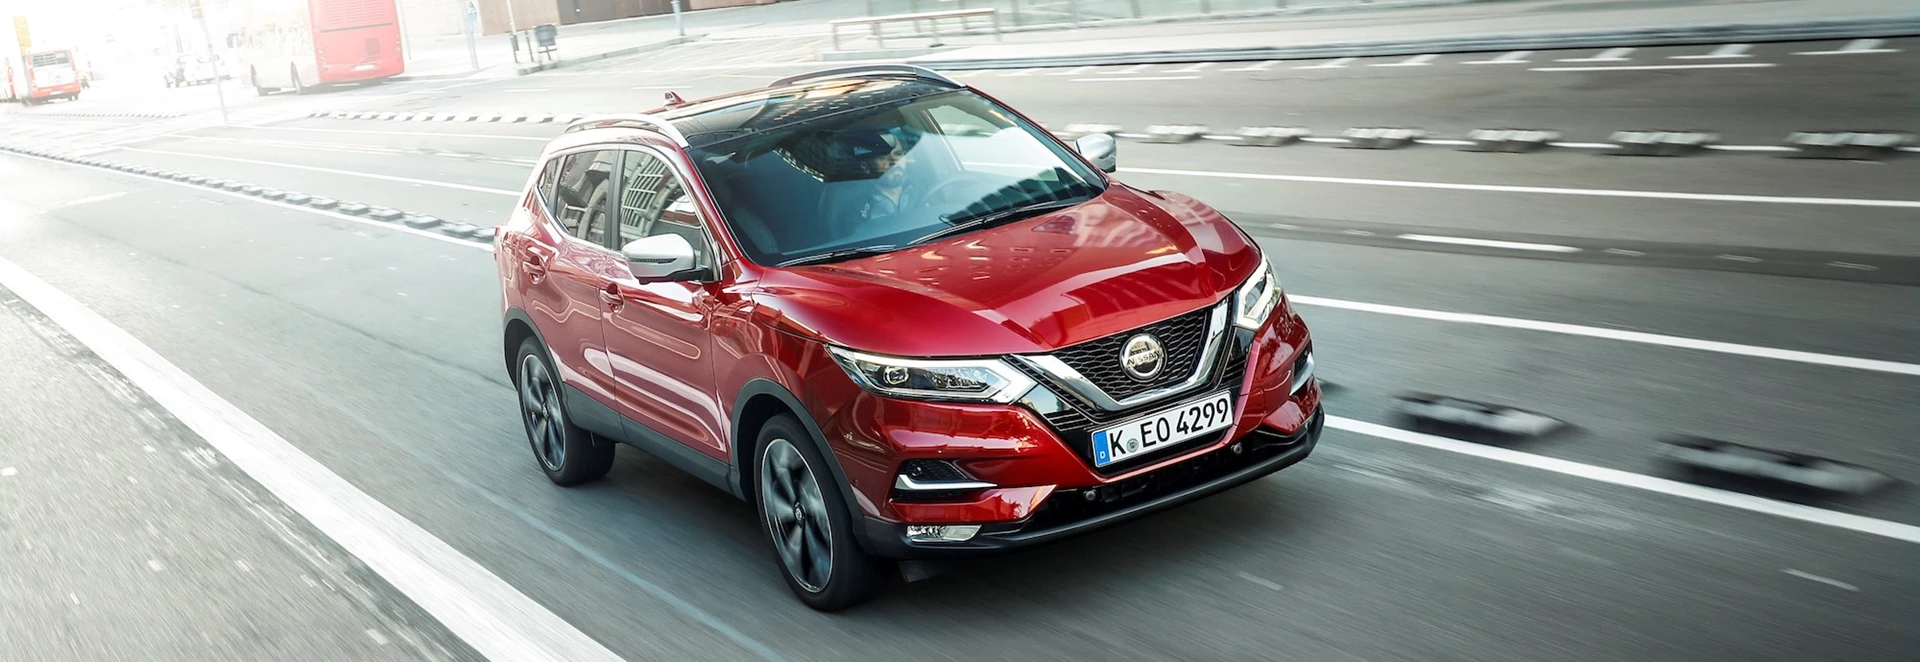 Behind the wheel of the new Nissan Qashqai 